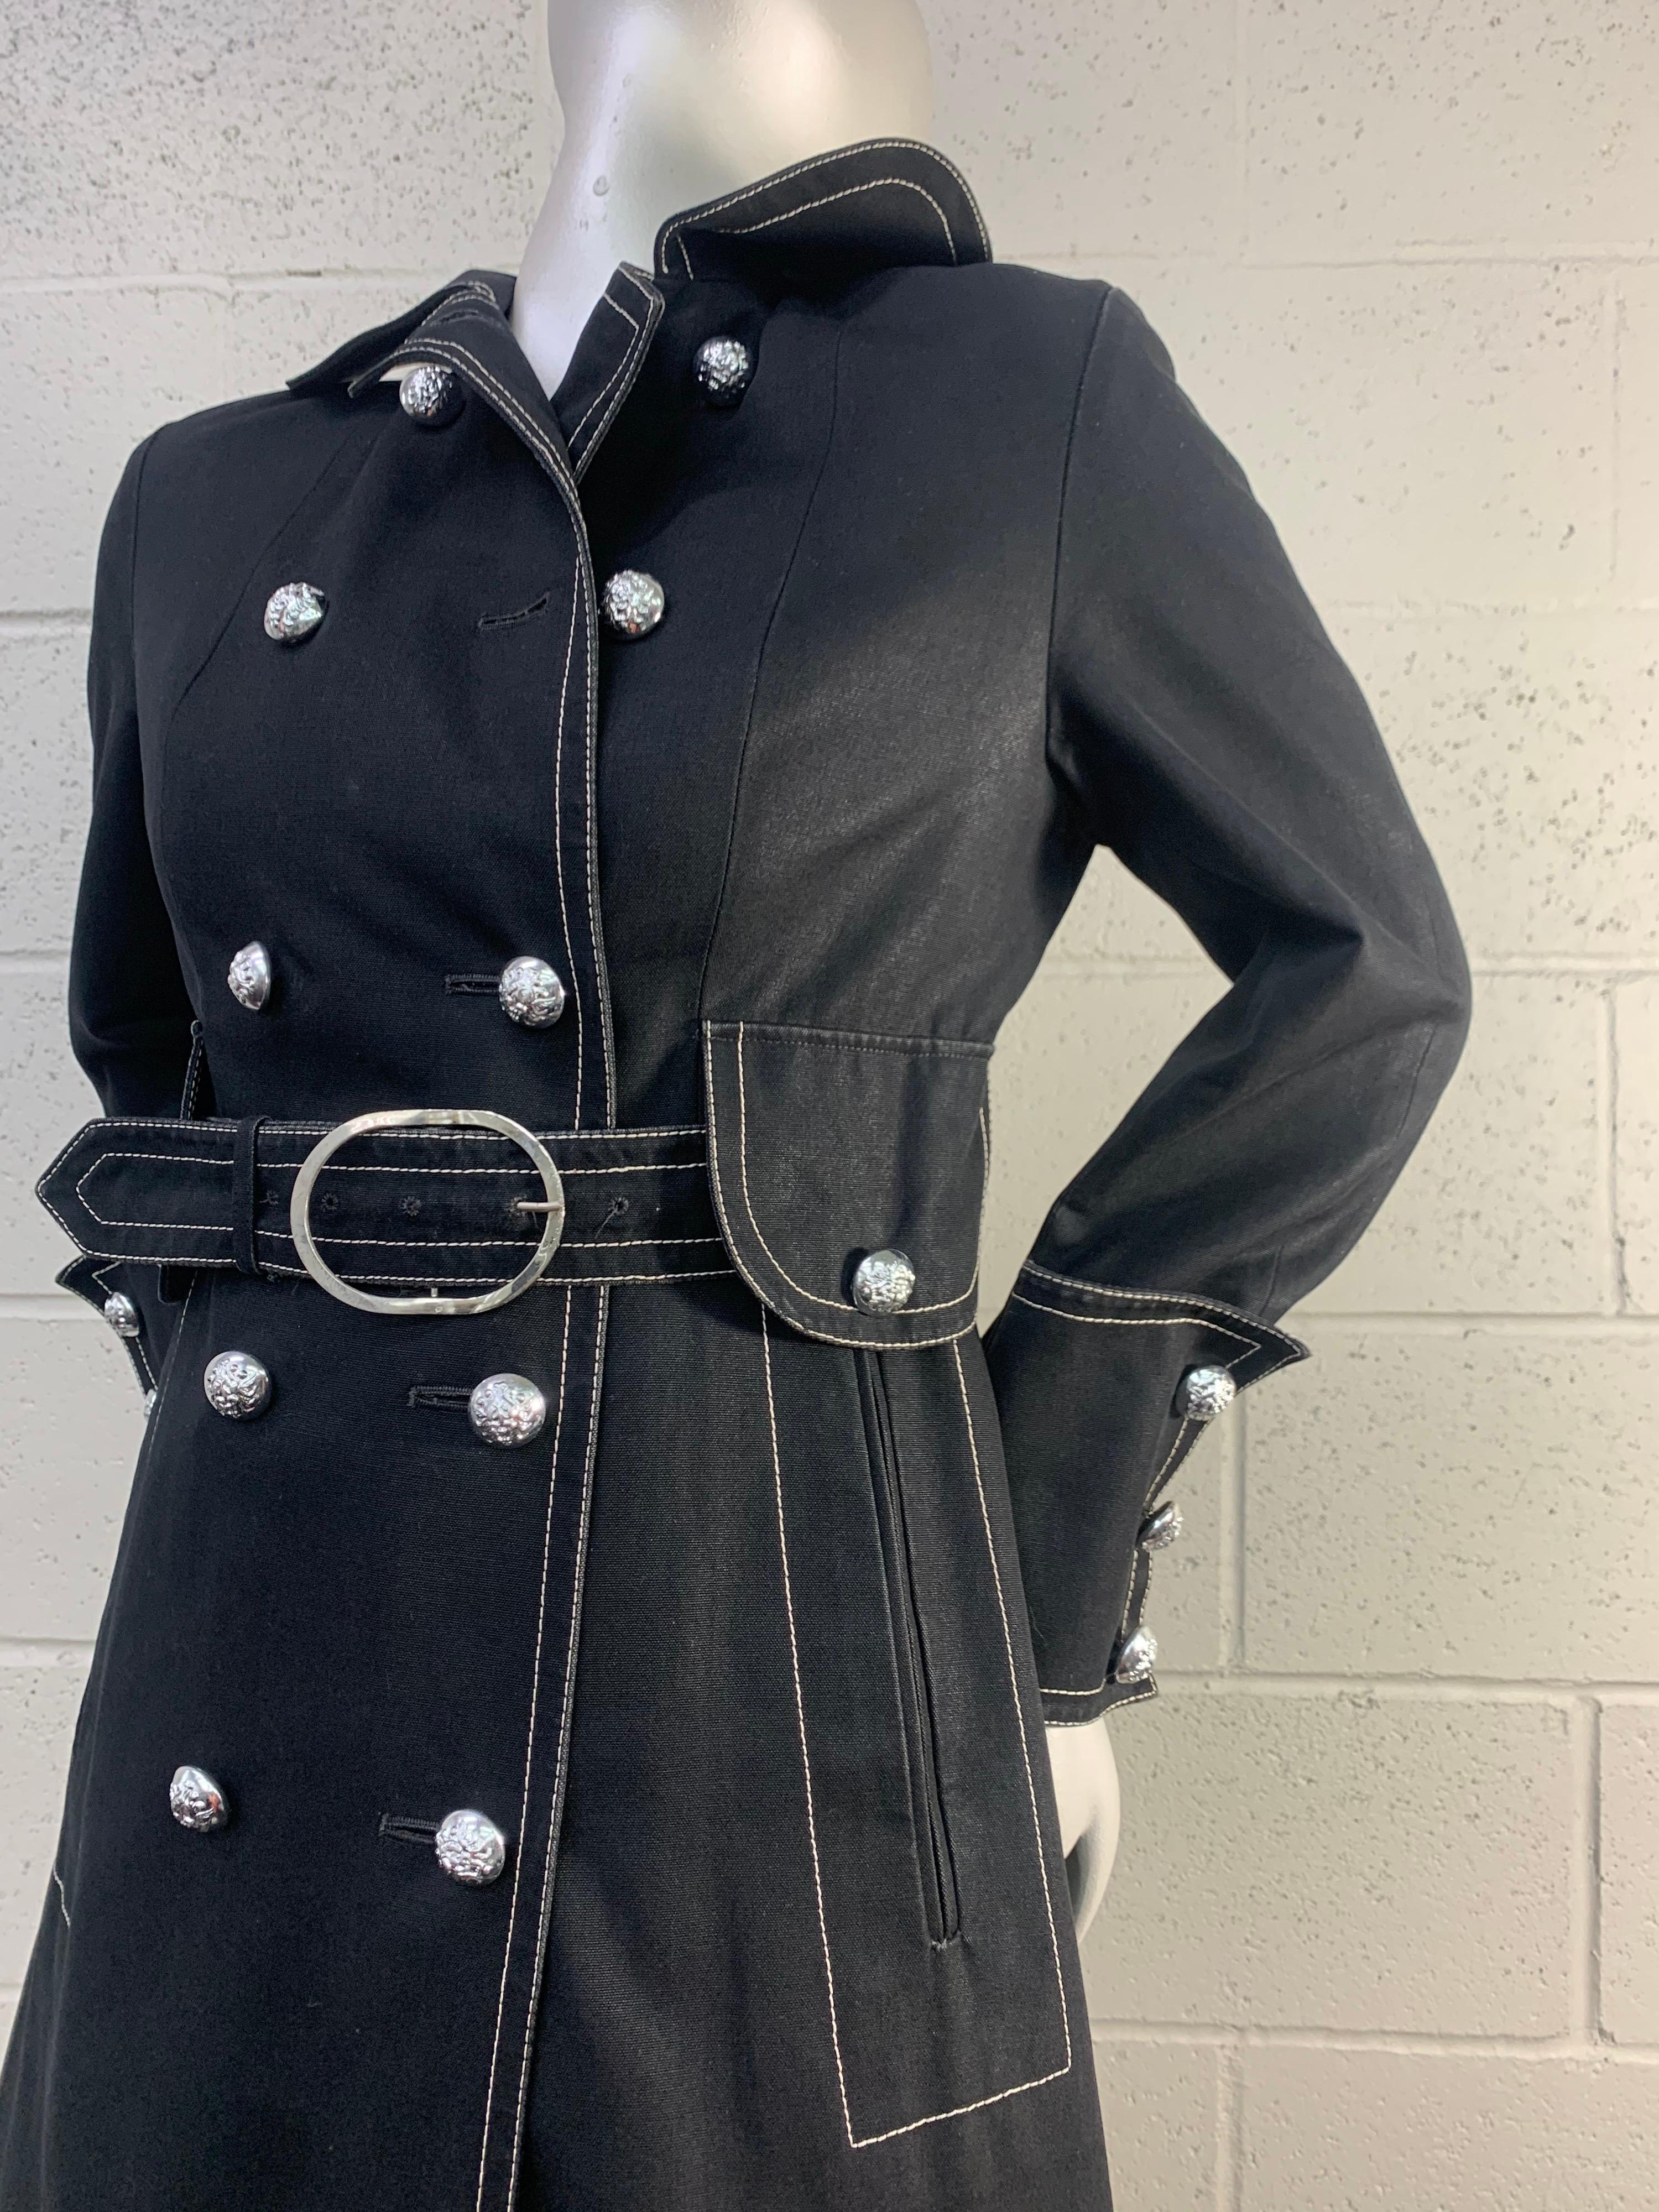 1960 Aquascutum - London black canvas trenchcoat with matching original belt and white topstitching. Silver insignia buttons embellish this smart and functional jacket. Aquascutum was the official maker of rainwear for the Royal Family in Britain